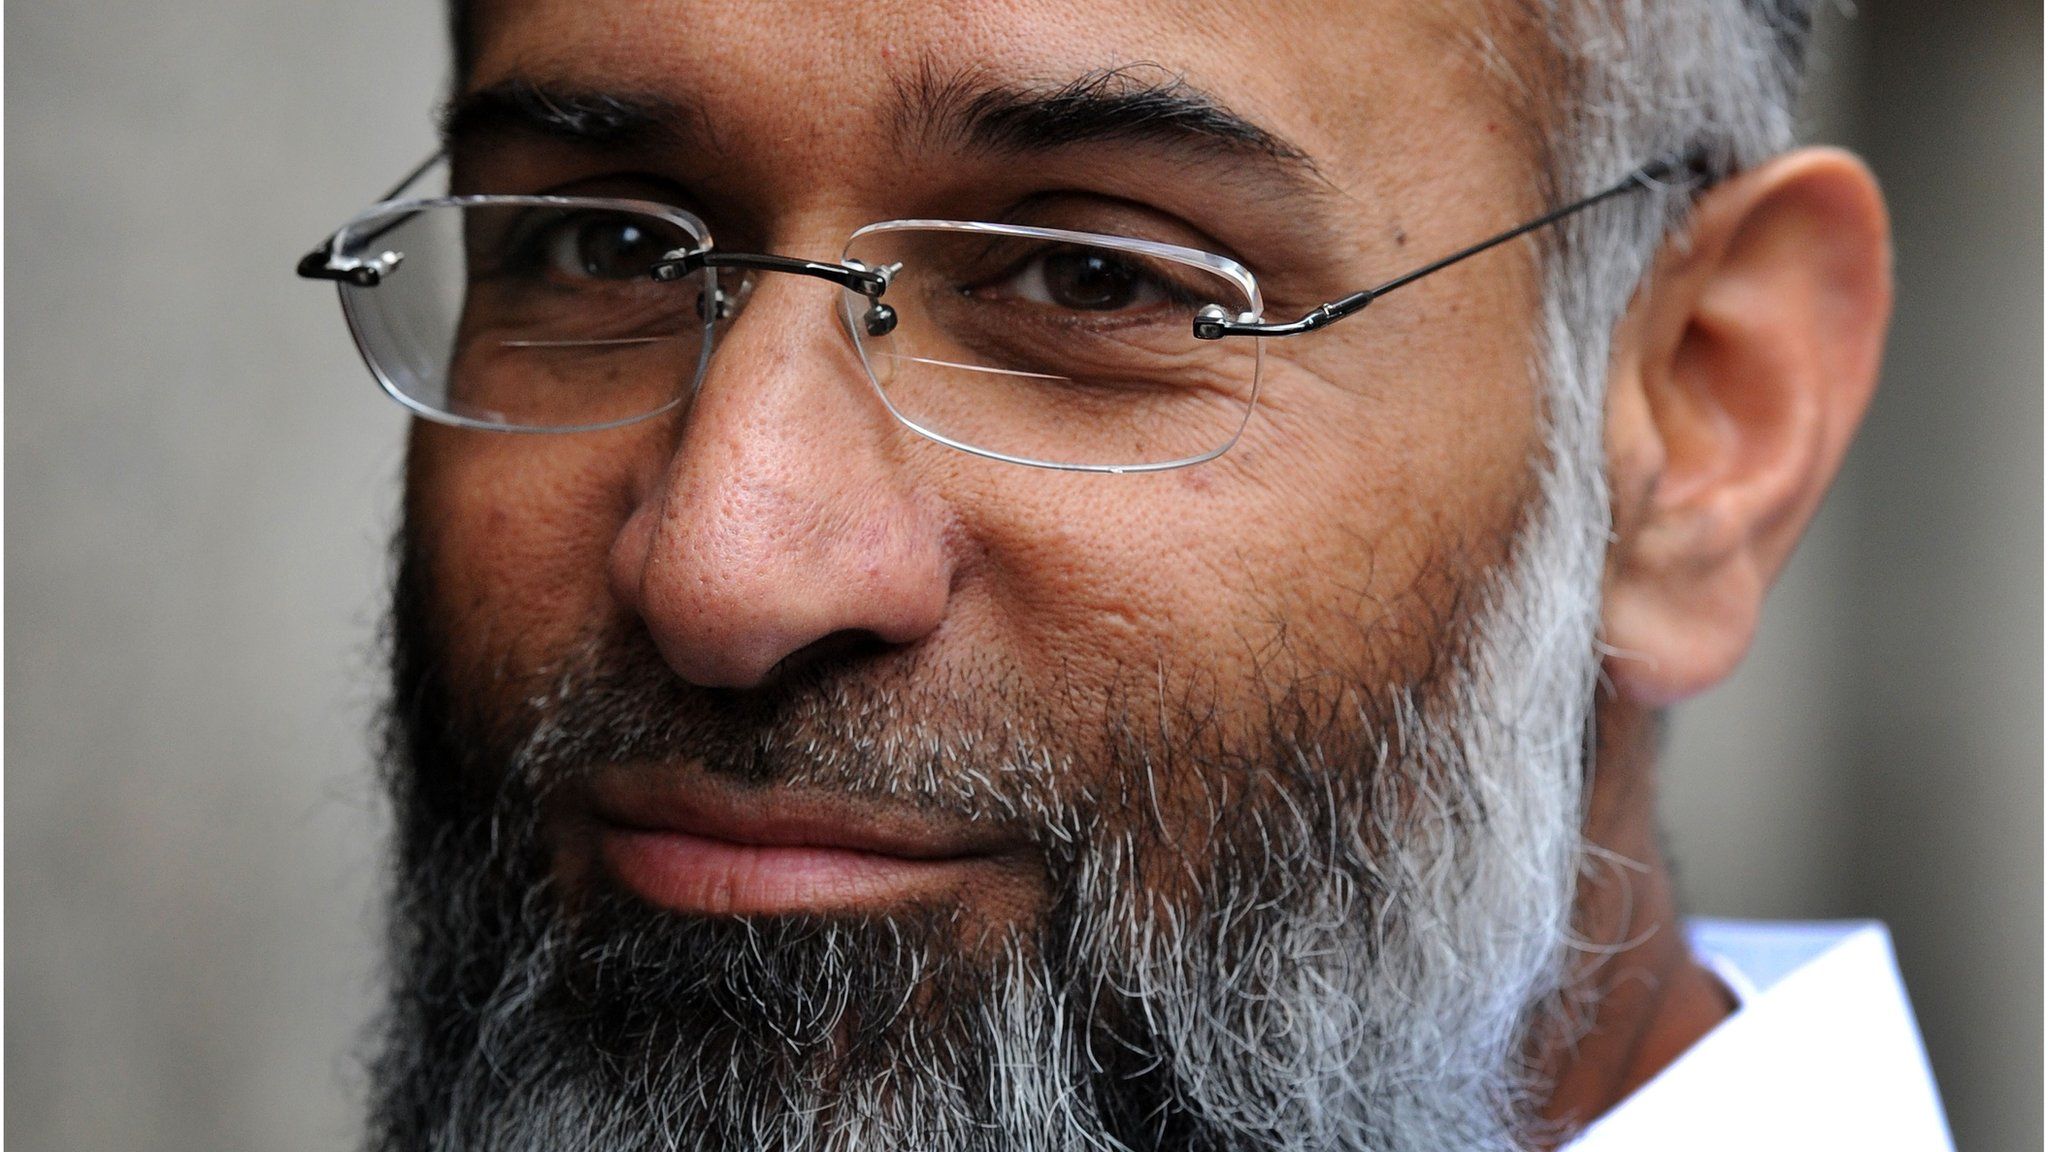 Radical Cleric Anjem Choudary Guilty Of Inviting Is Support Bbc News 